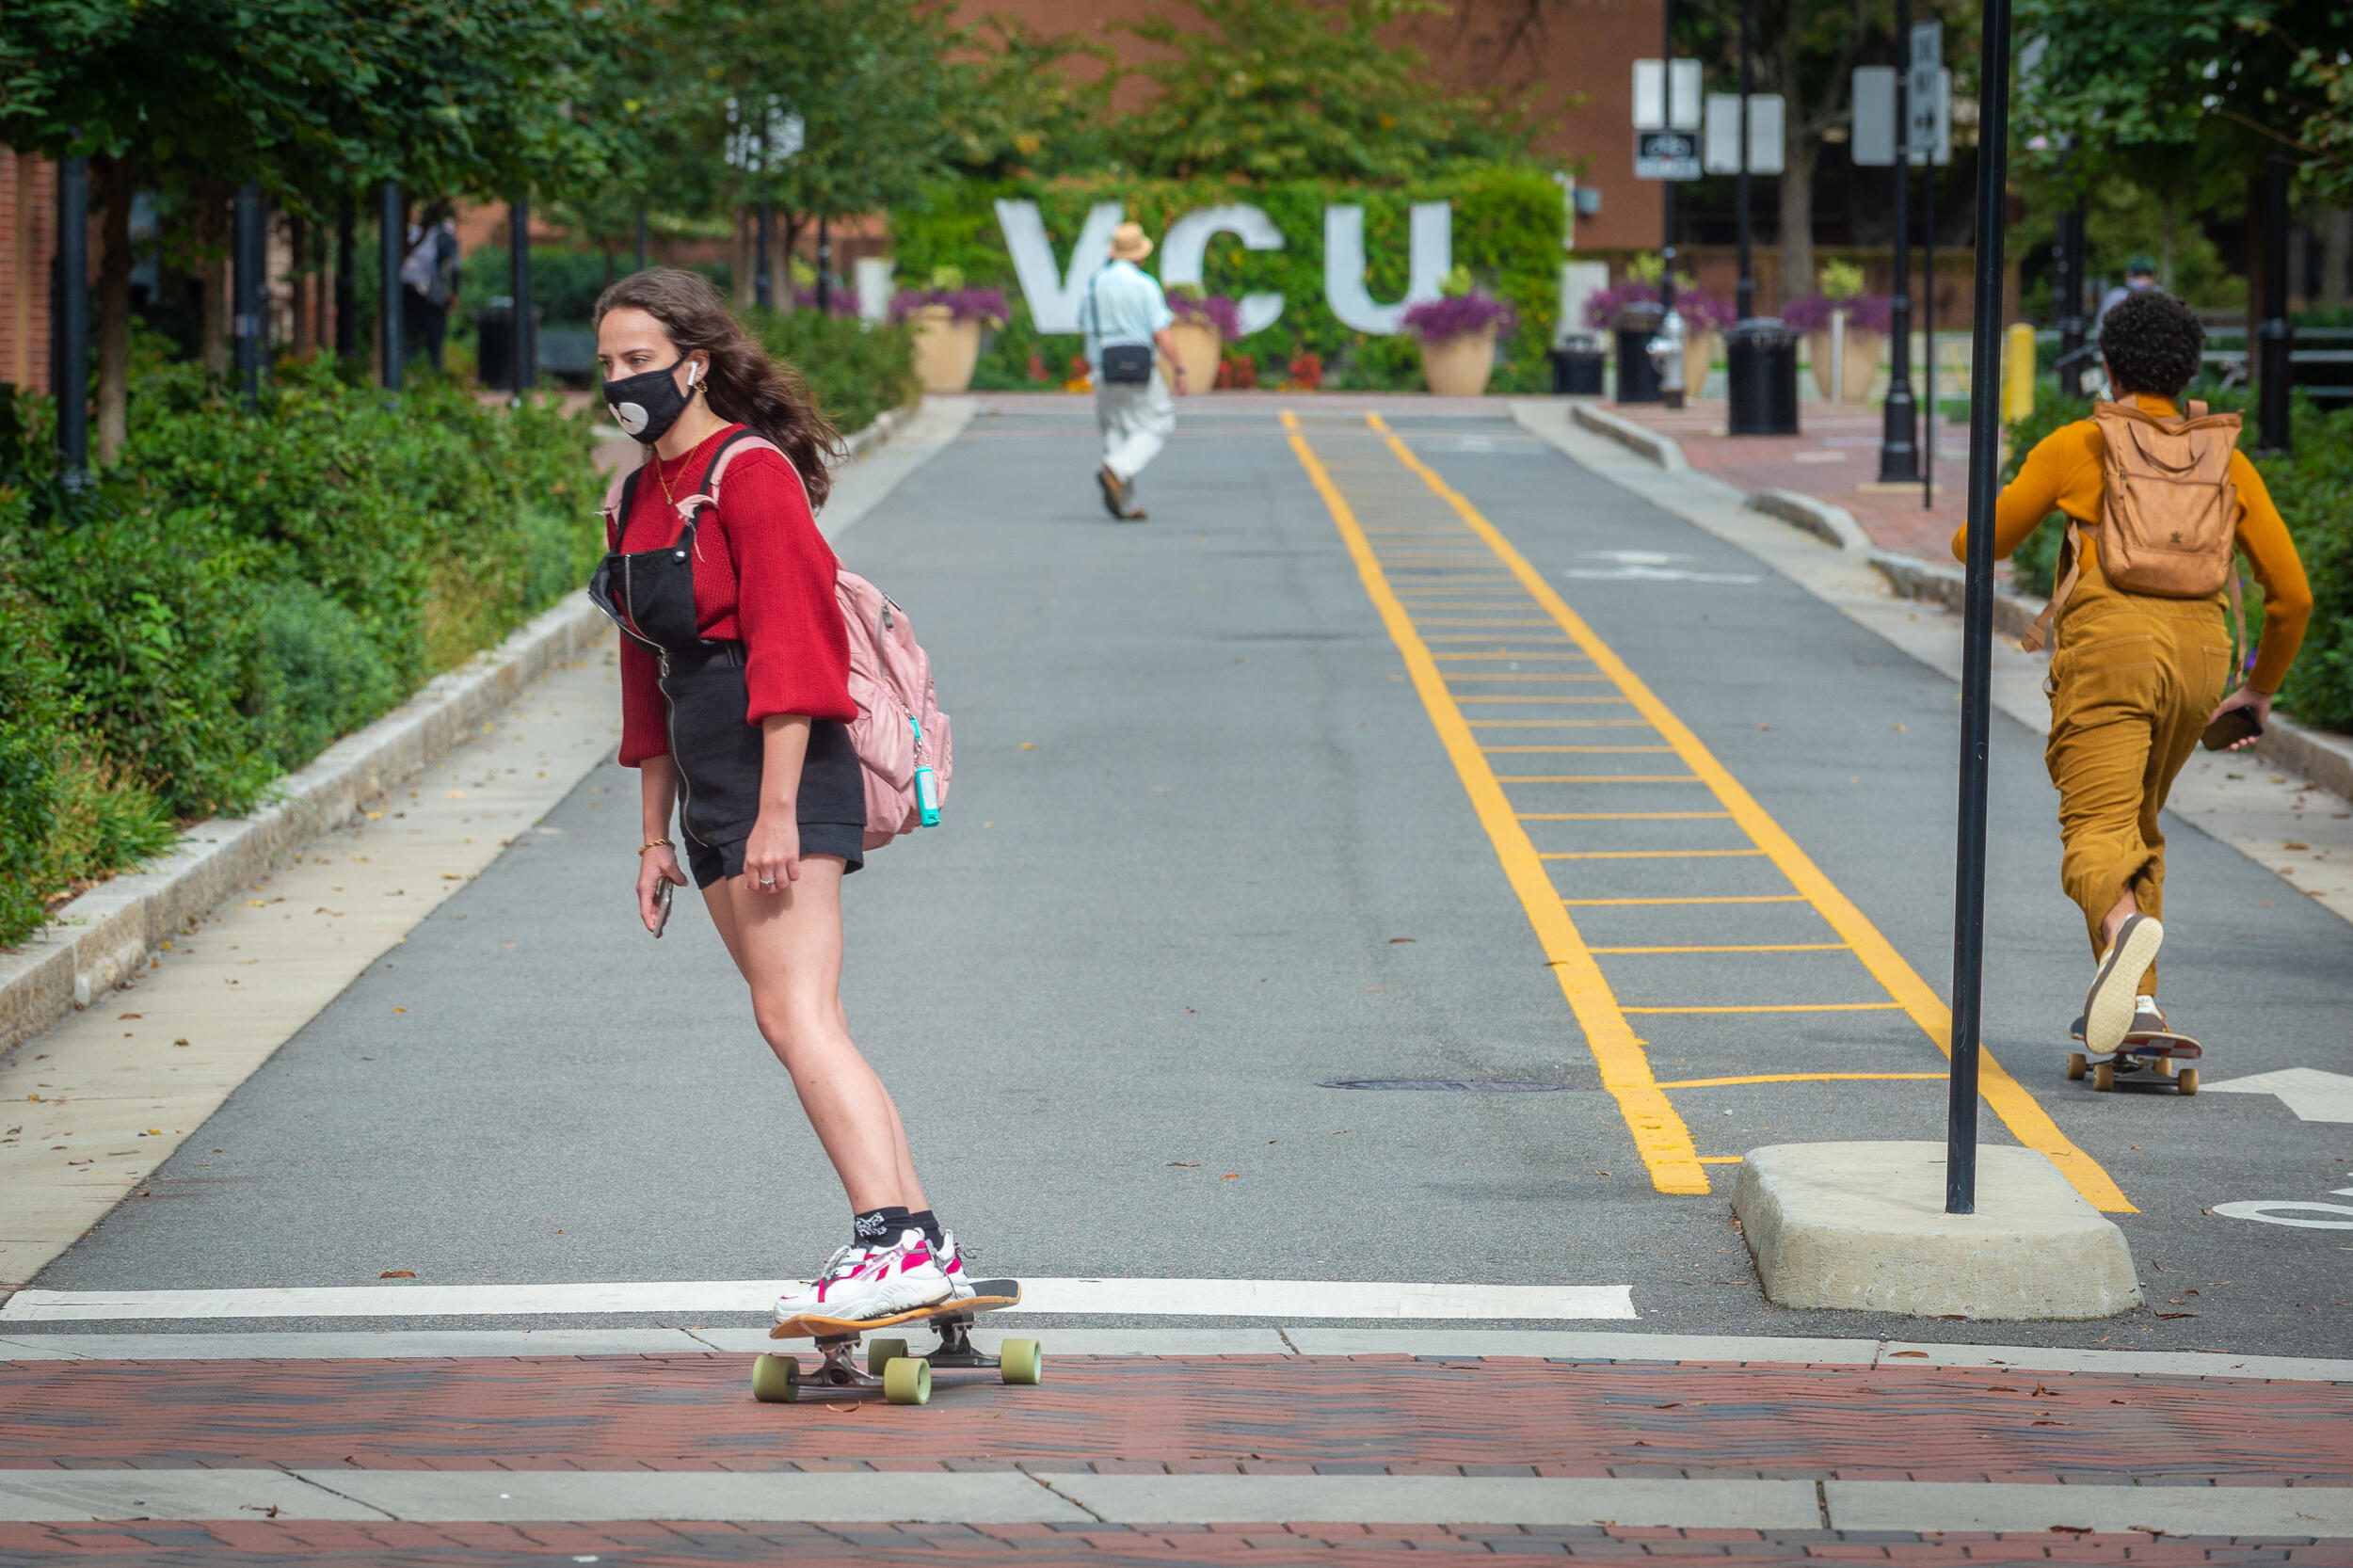 A student skateboards to class on a city street in front of a green wall with VCU letters on it.